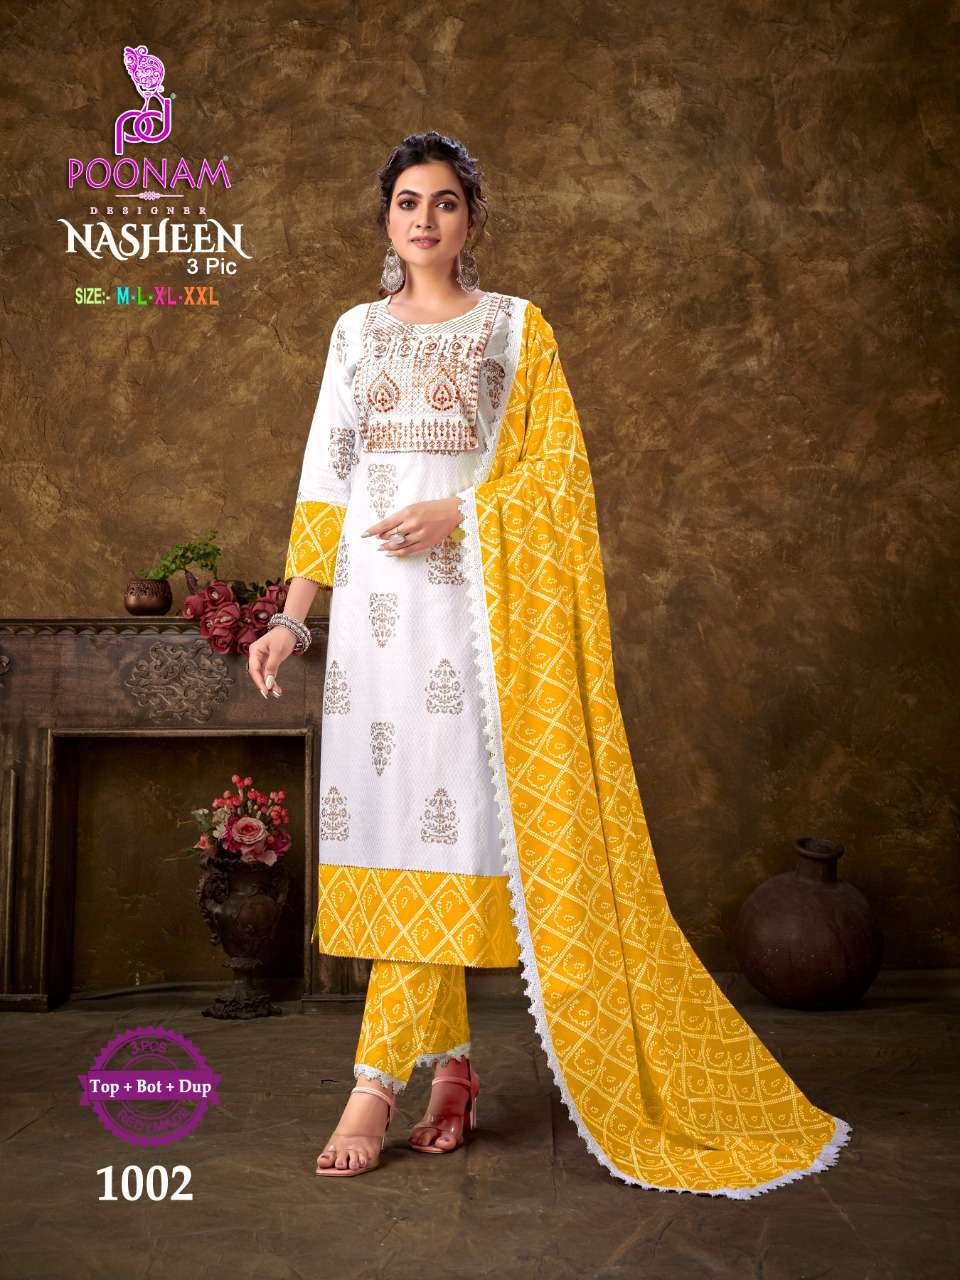 Poonam Designer Nasheen 3 Piece In Pure Rayon Embroidery With Rayon Print Dupatta On wholesale